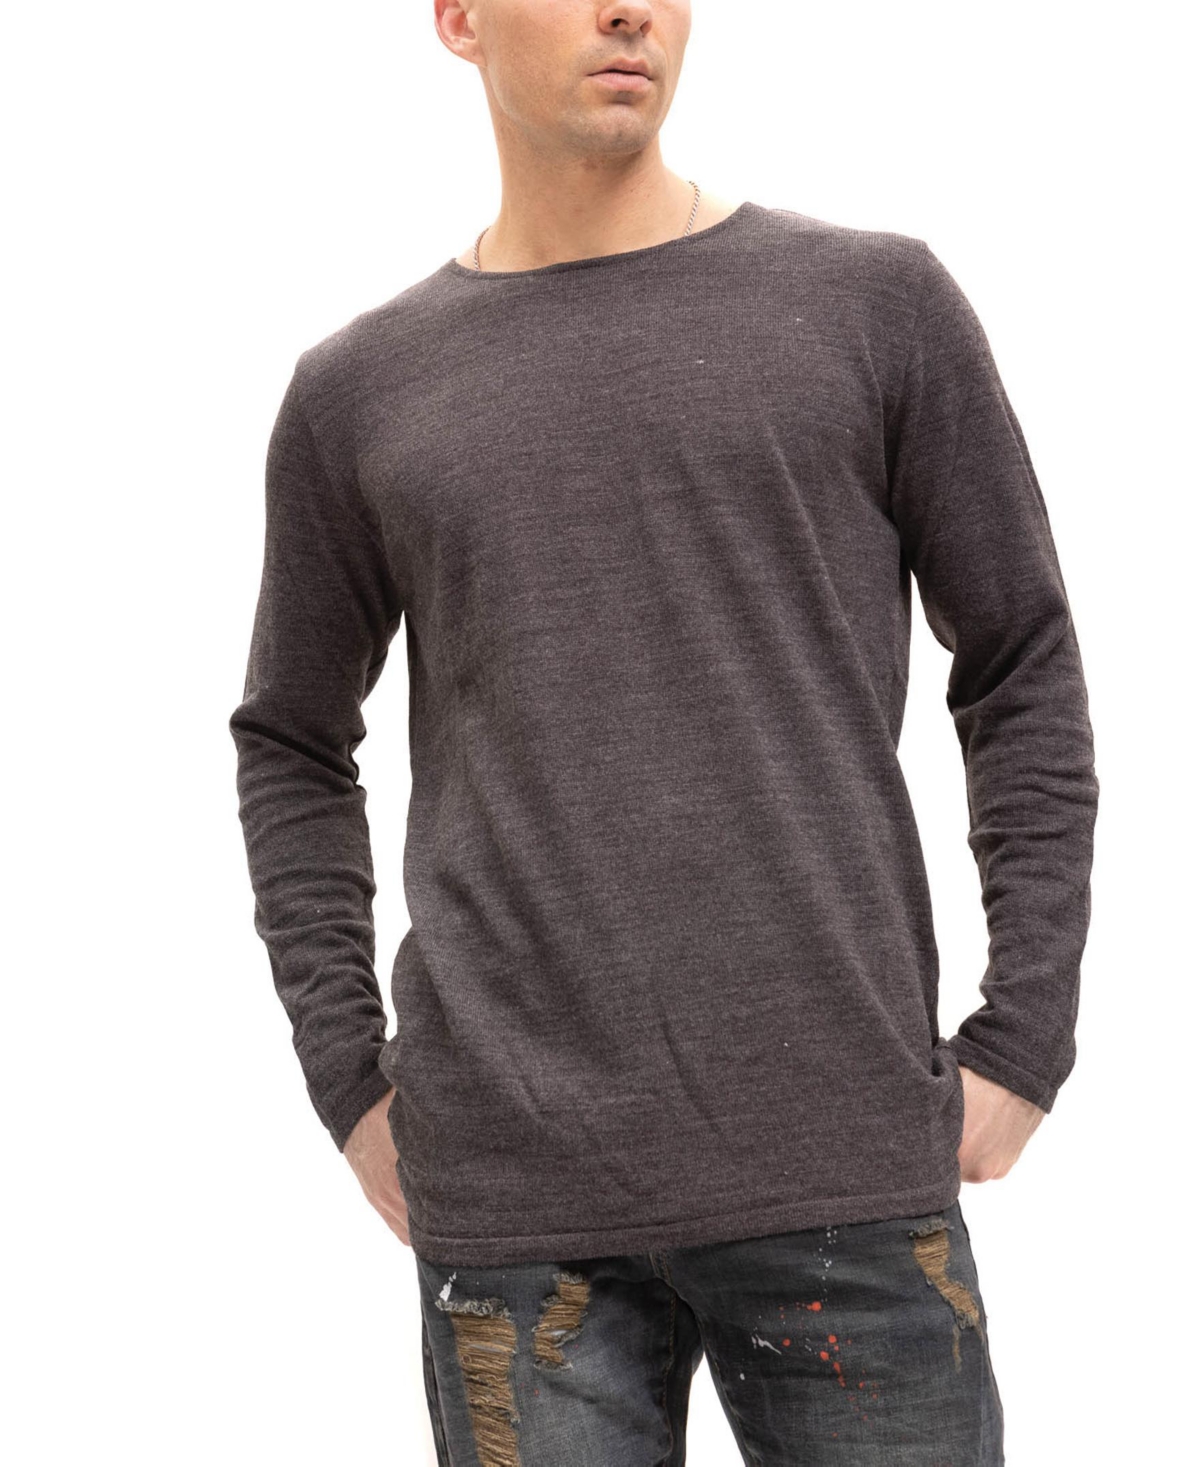 Men's Modern Double Distorted Sweater - Anthracite